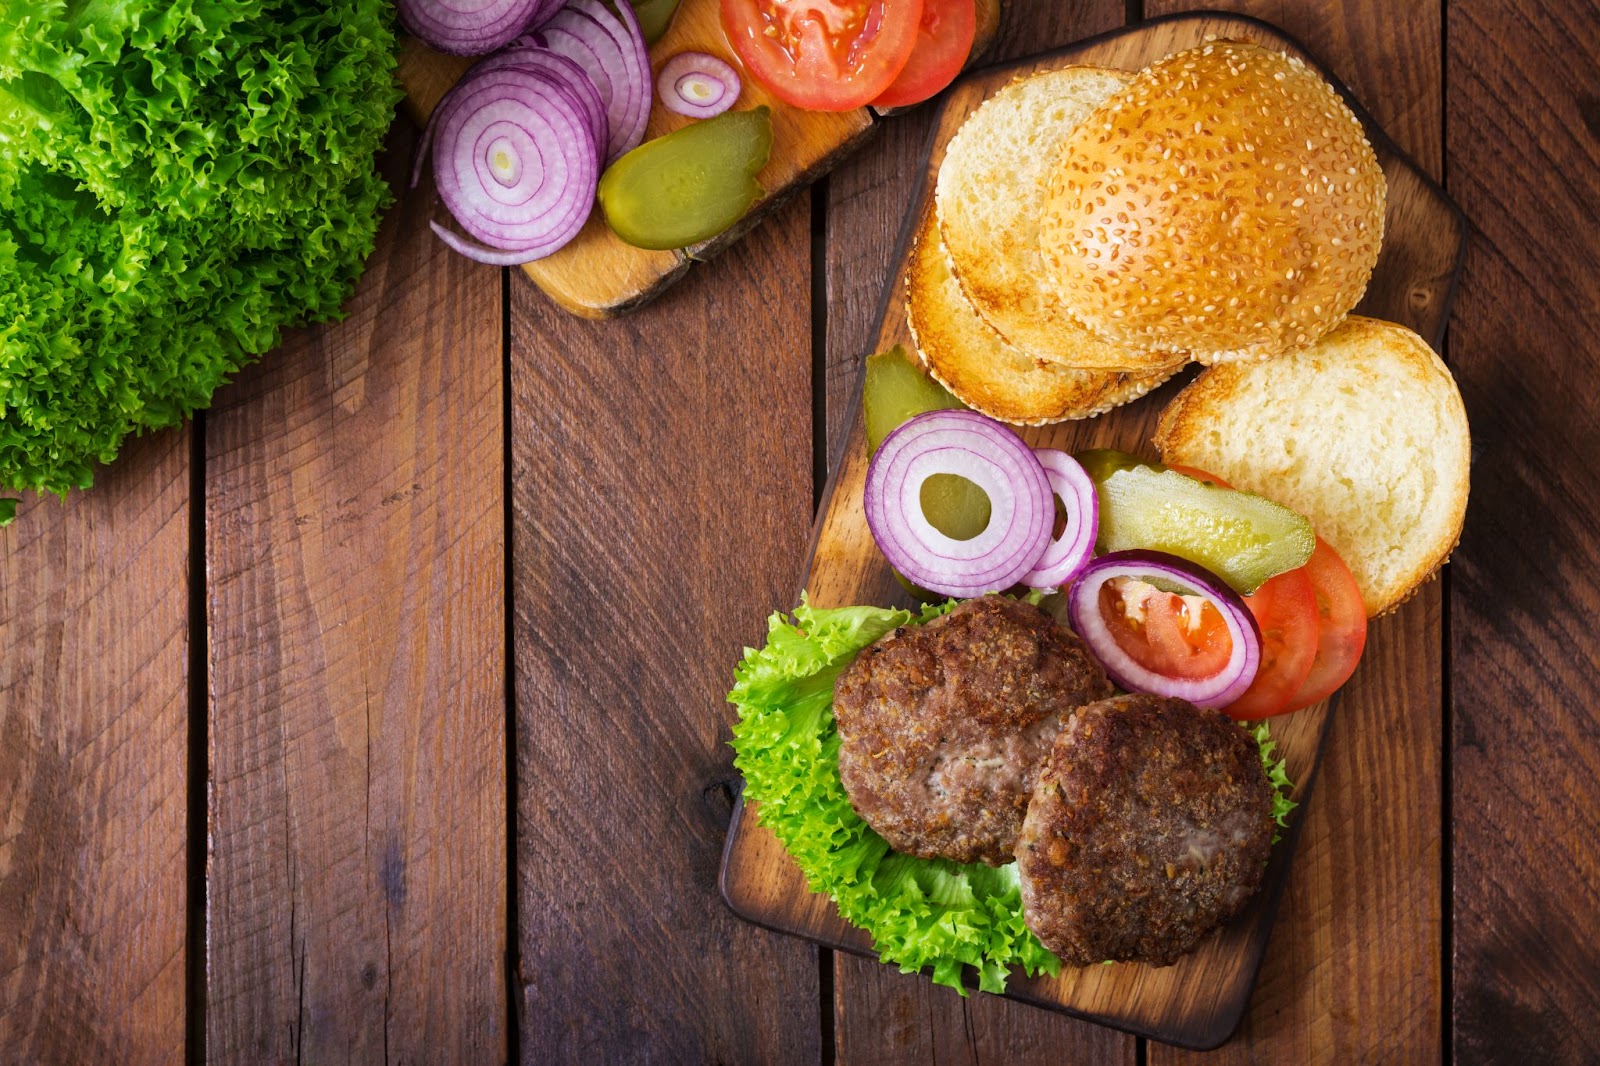 A Build Your Own Burger Board is a great Board Presentation Idea For a Dinner For Two, The Board Pictured Features Burger Patties, Buns, and Toppings.